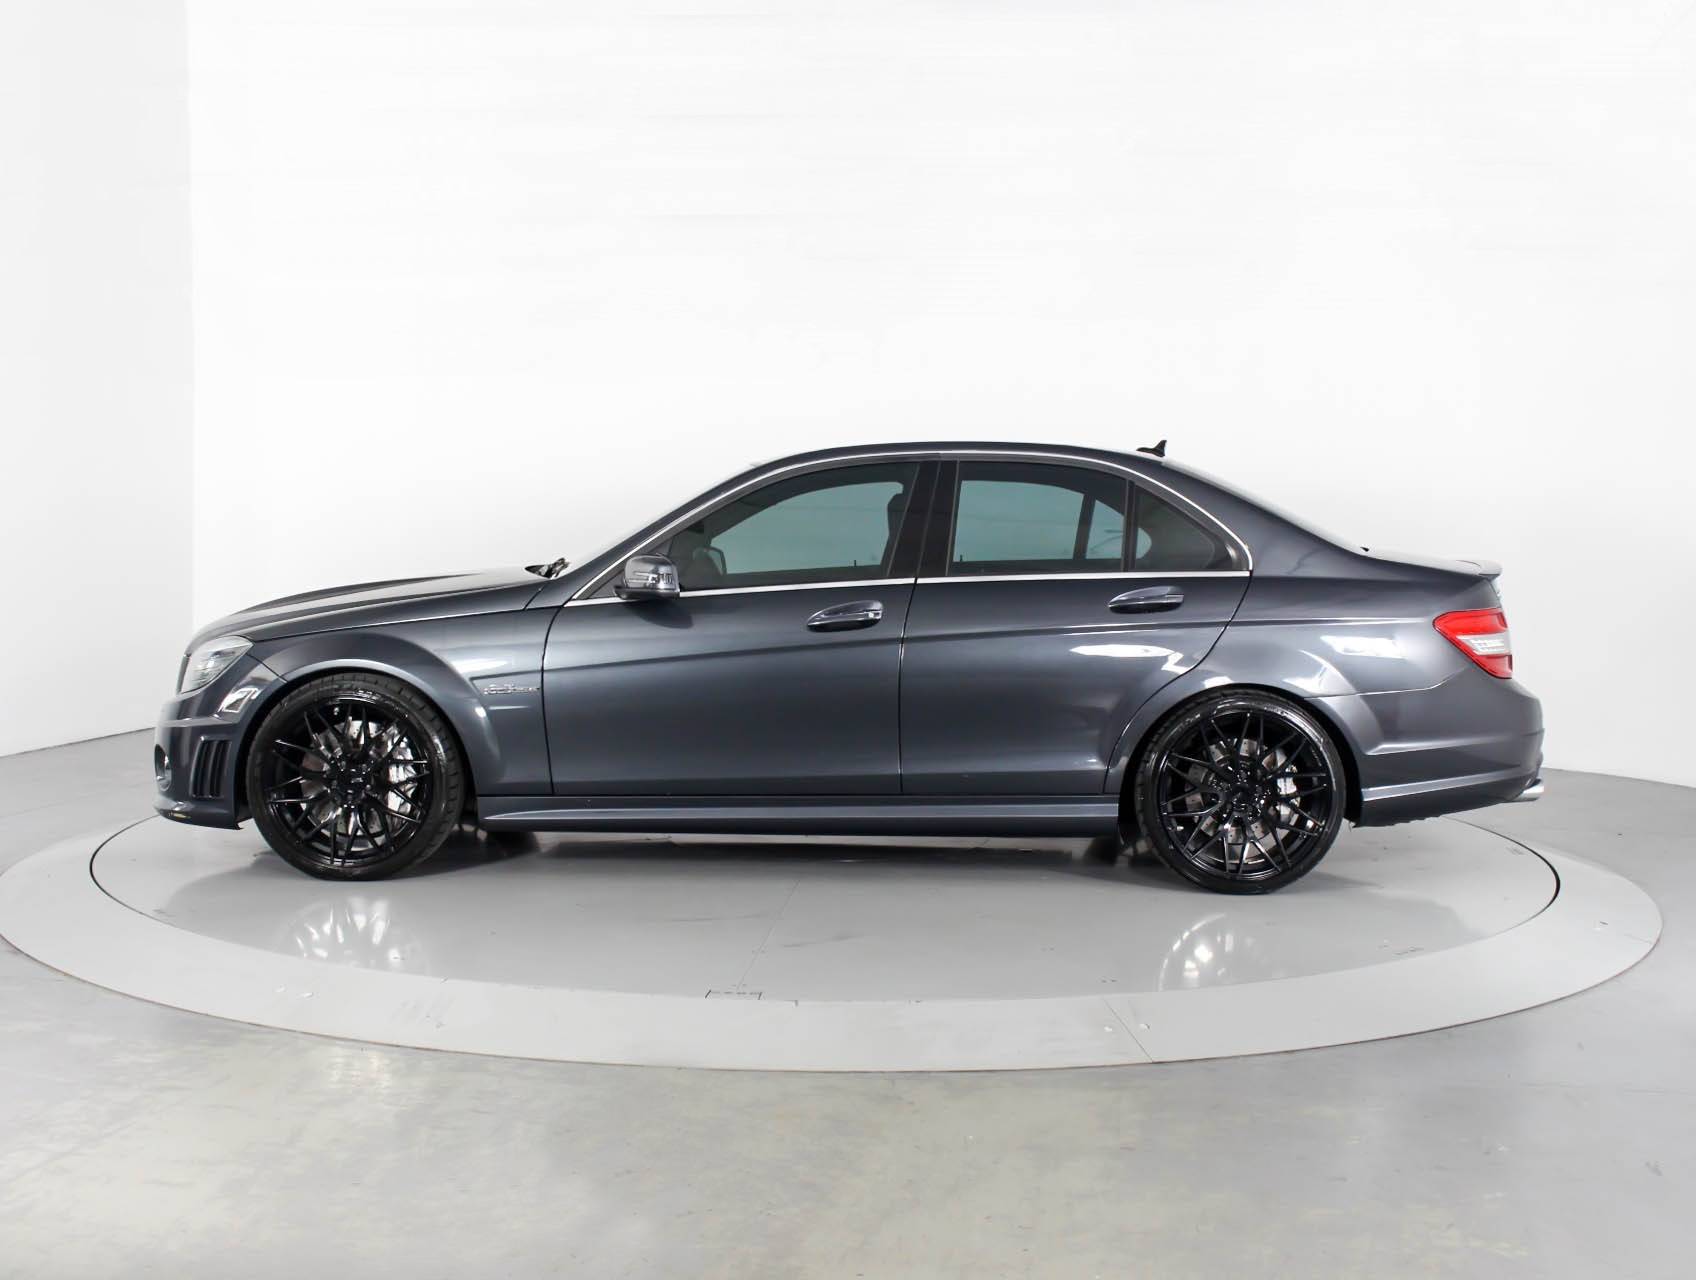 Used 2011 Mercedes Benz C Class C63 Amg Sedan For Sale In